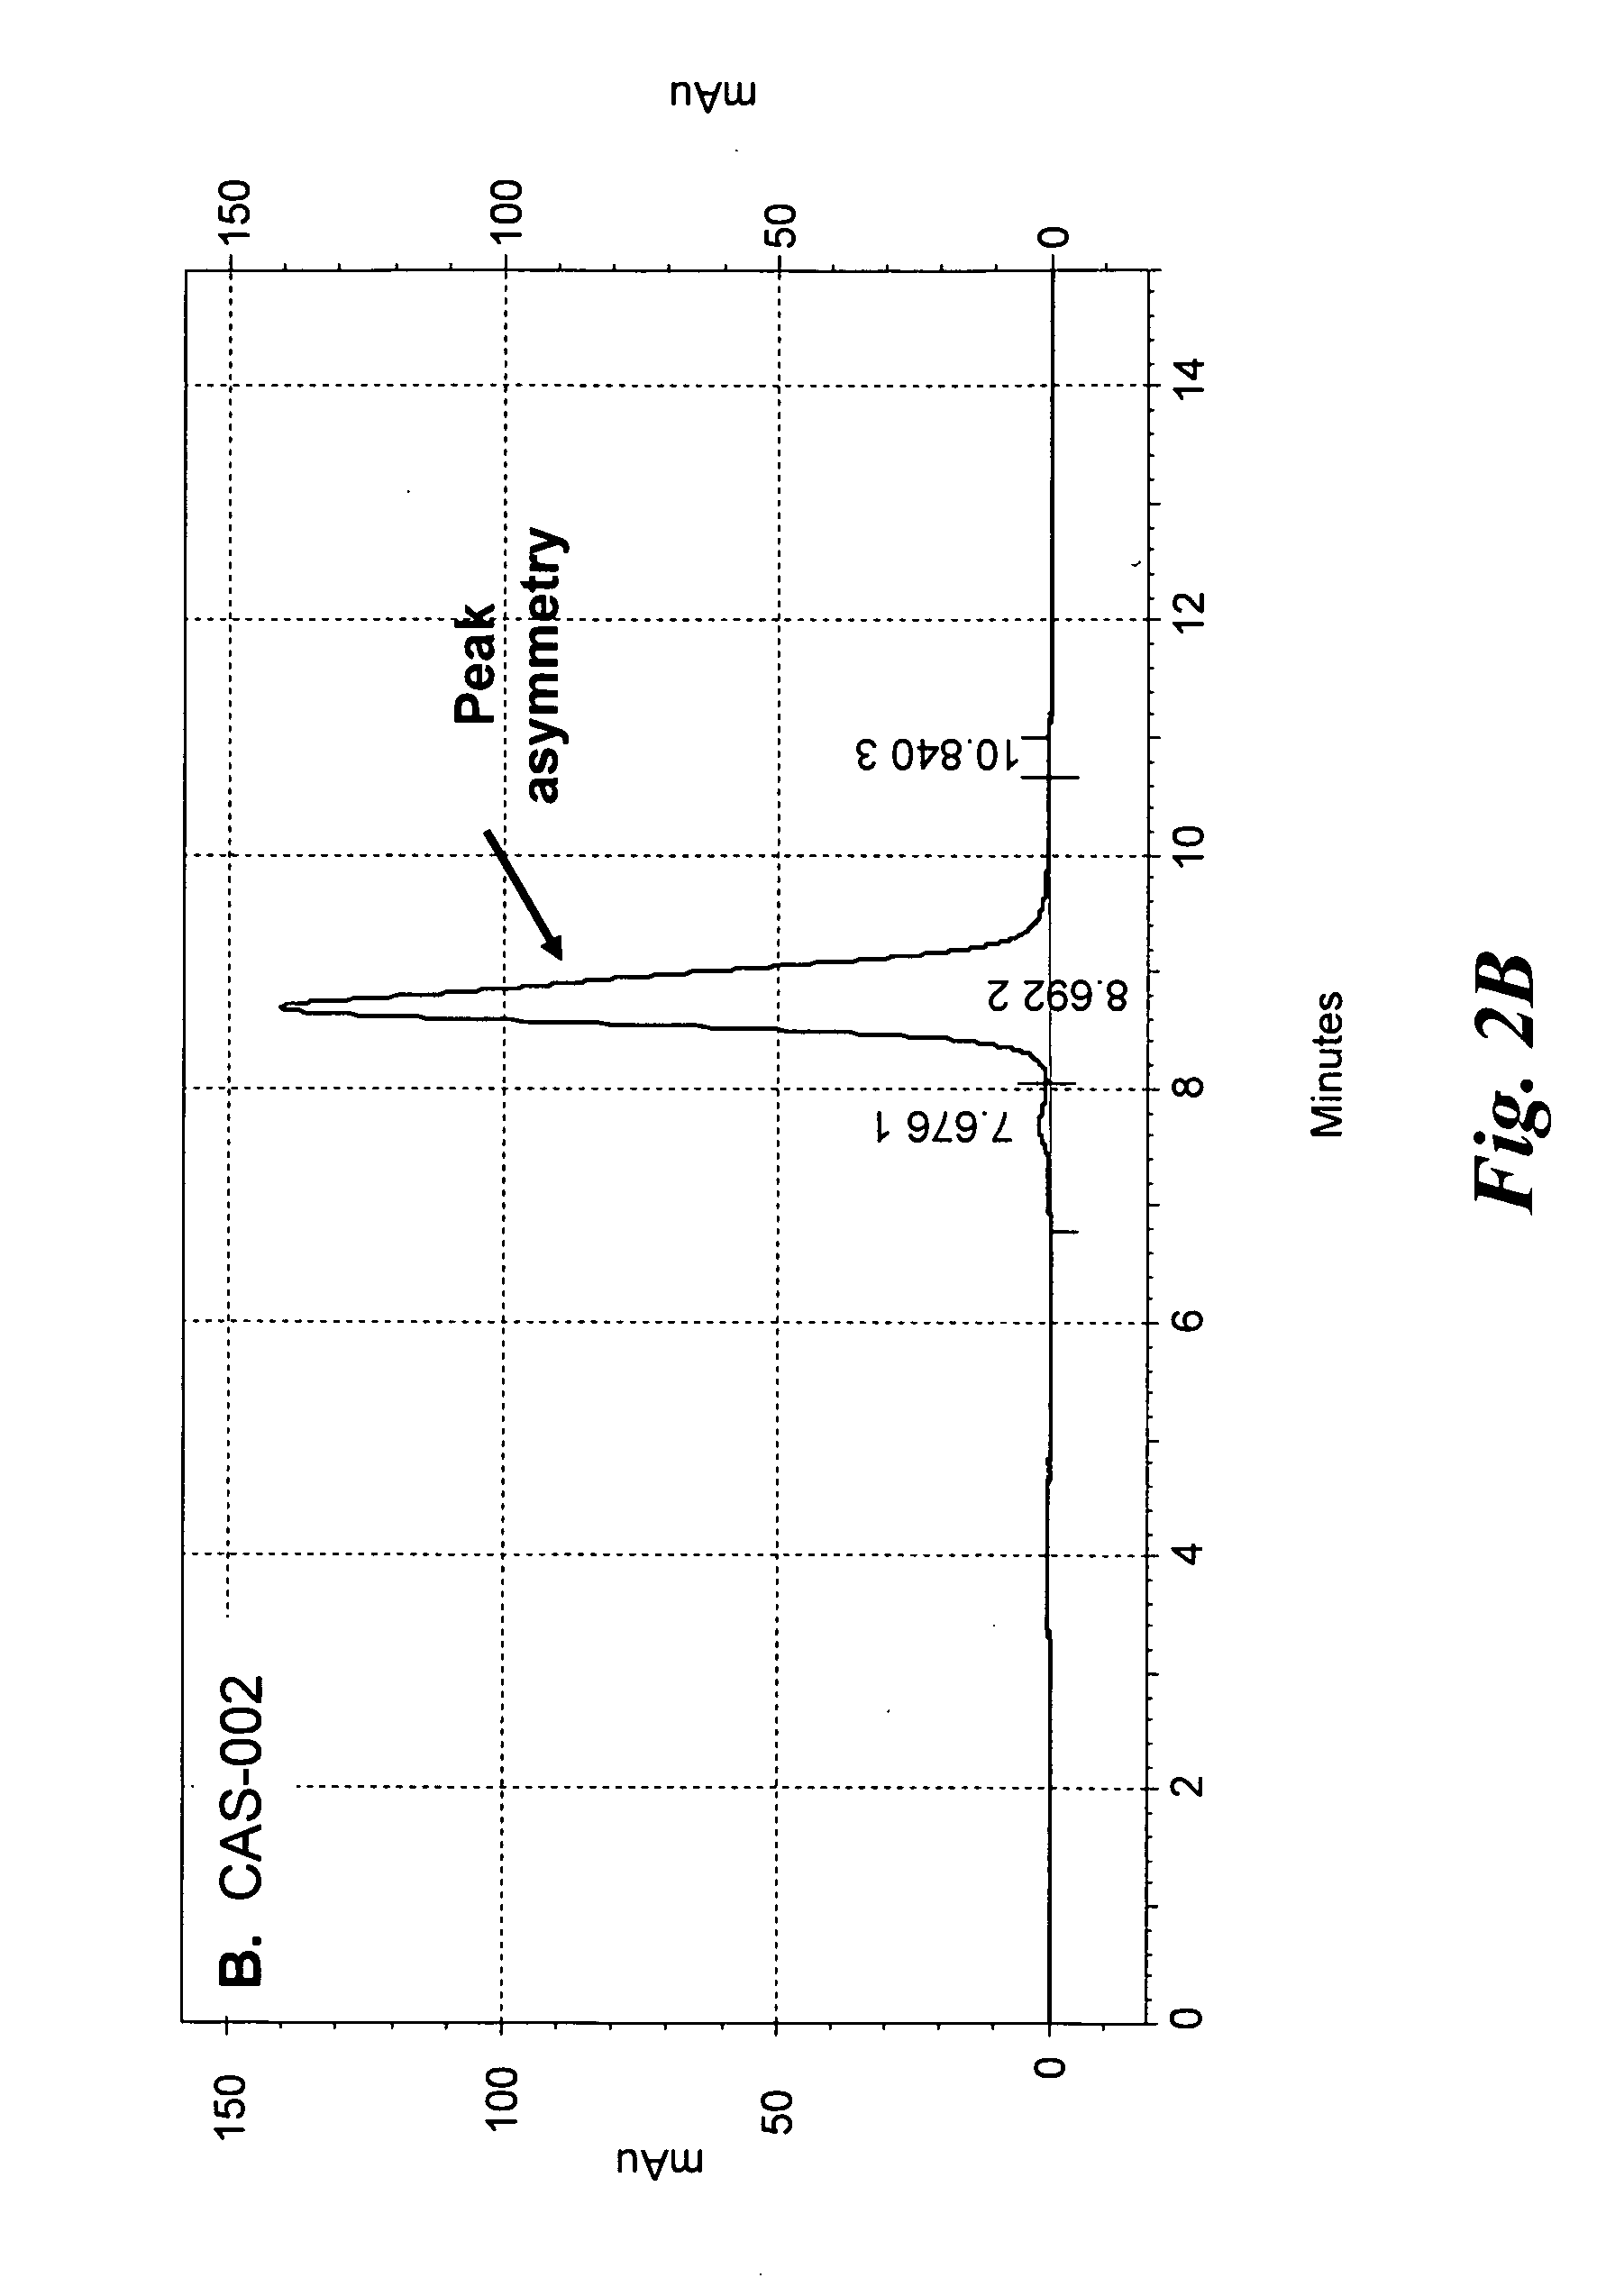 Cd37 immunotherapeutic and combination with bifunctional chemotherapeutic thereof